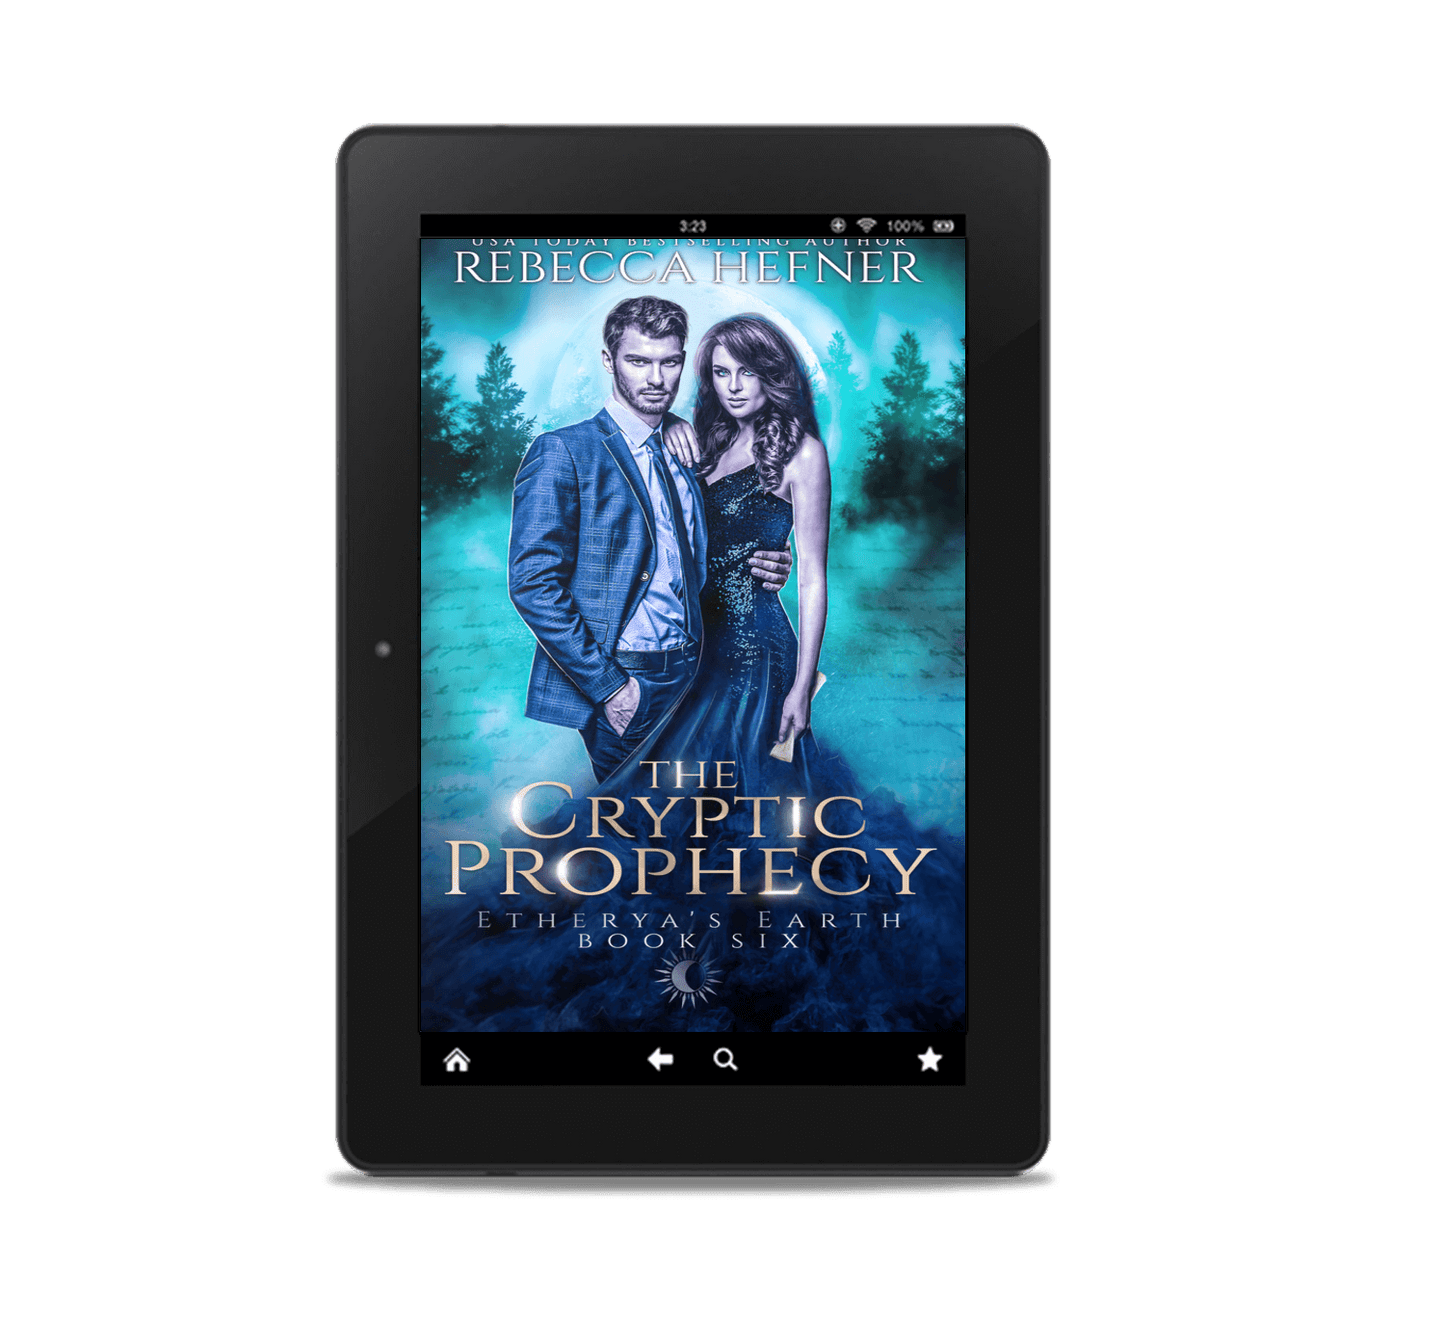 The Cryptic Prophecy (Etherya's Earth #6)